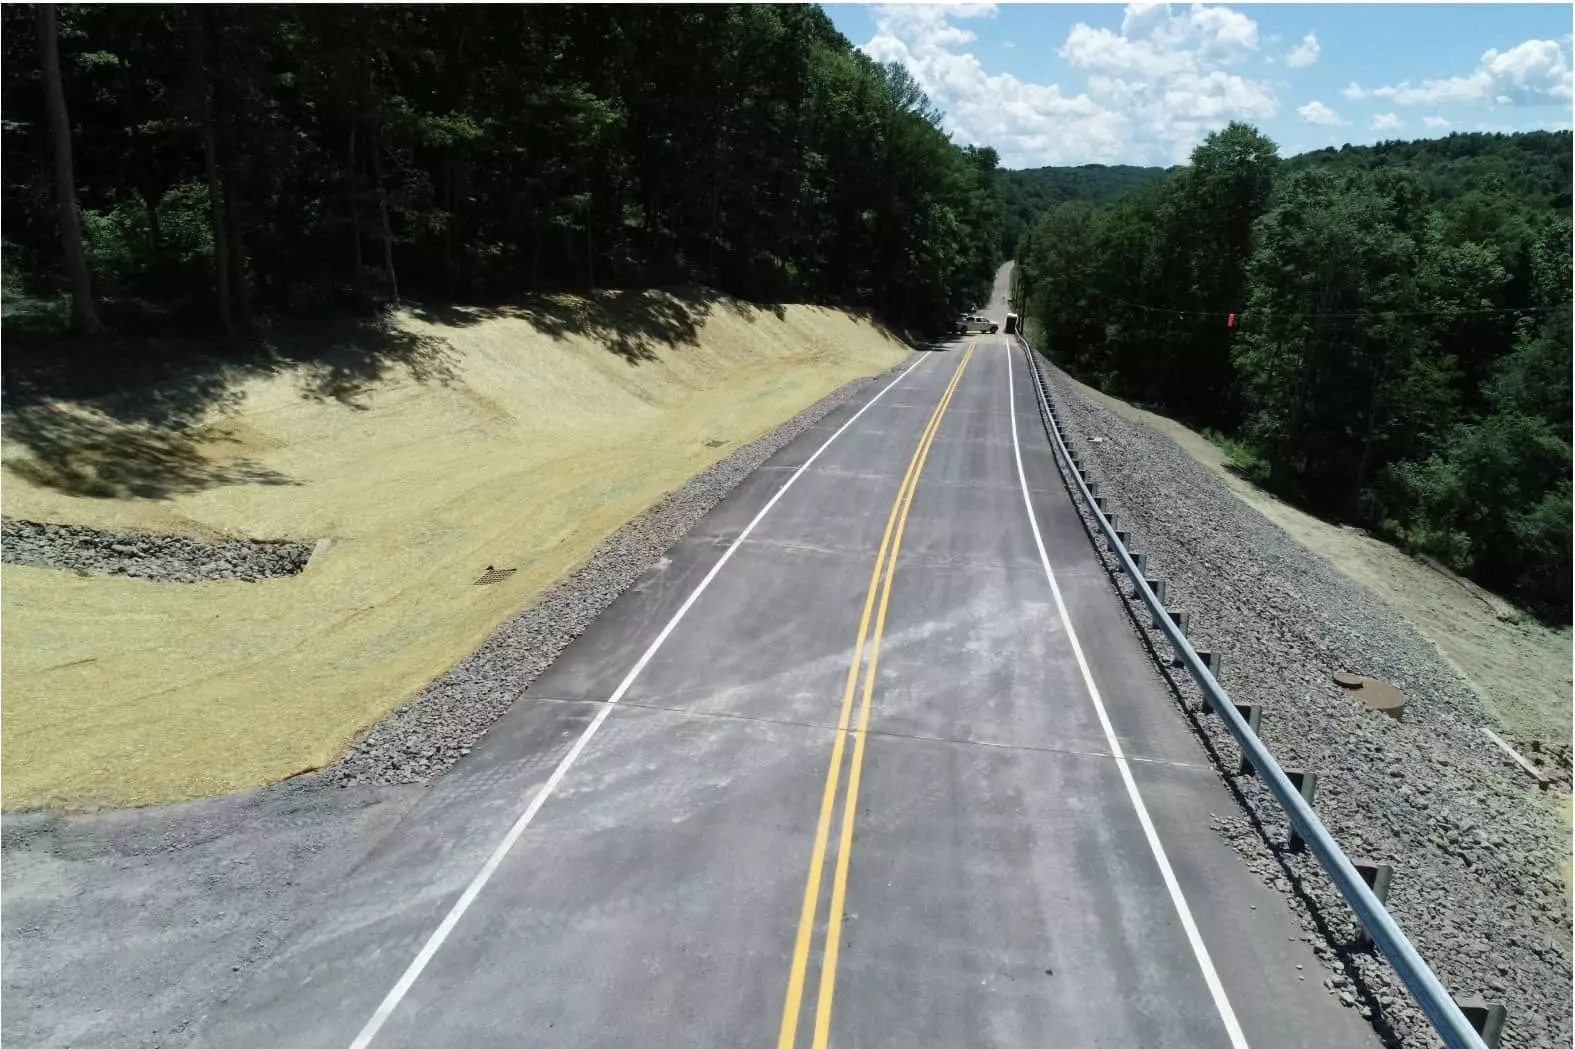 A two-lane highway has ground cover and drainage on either side.